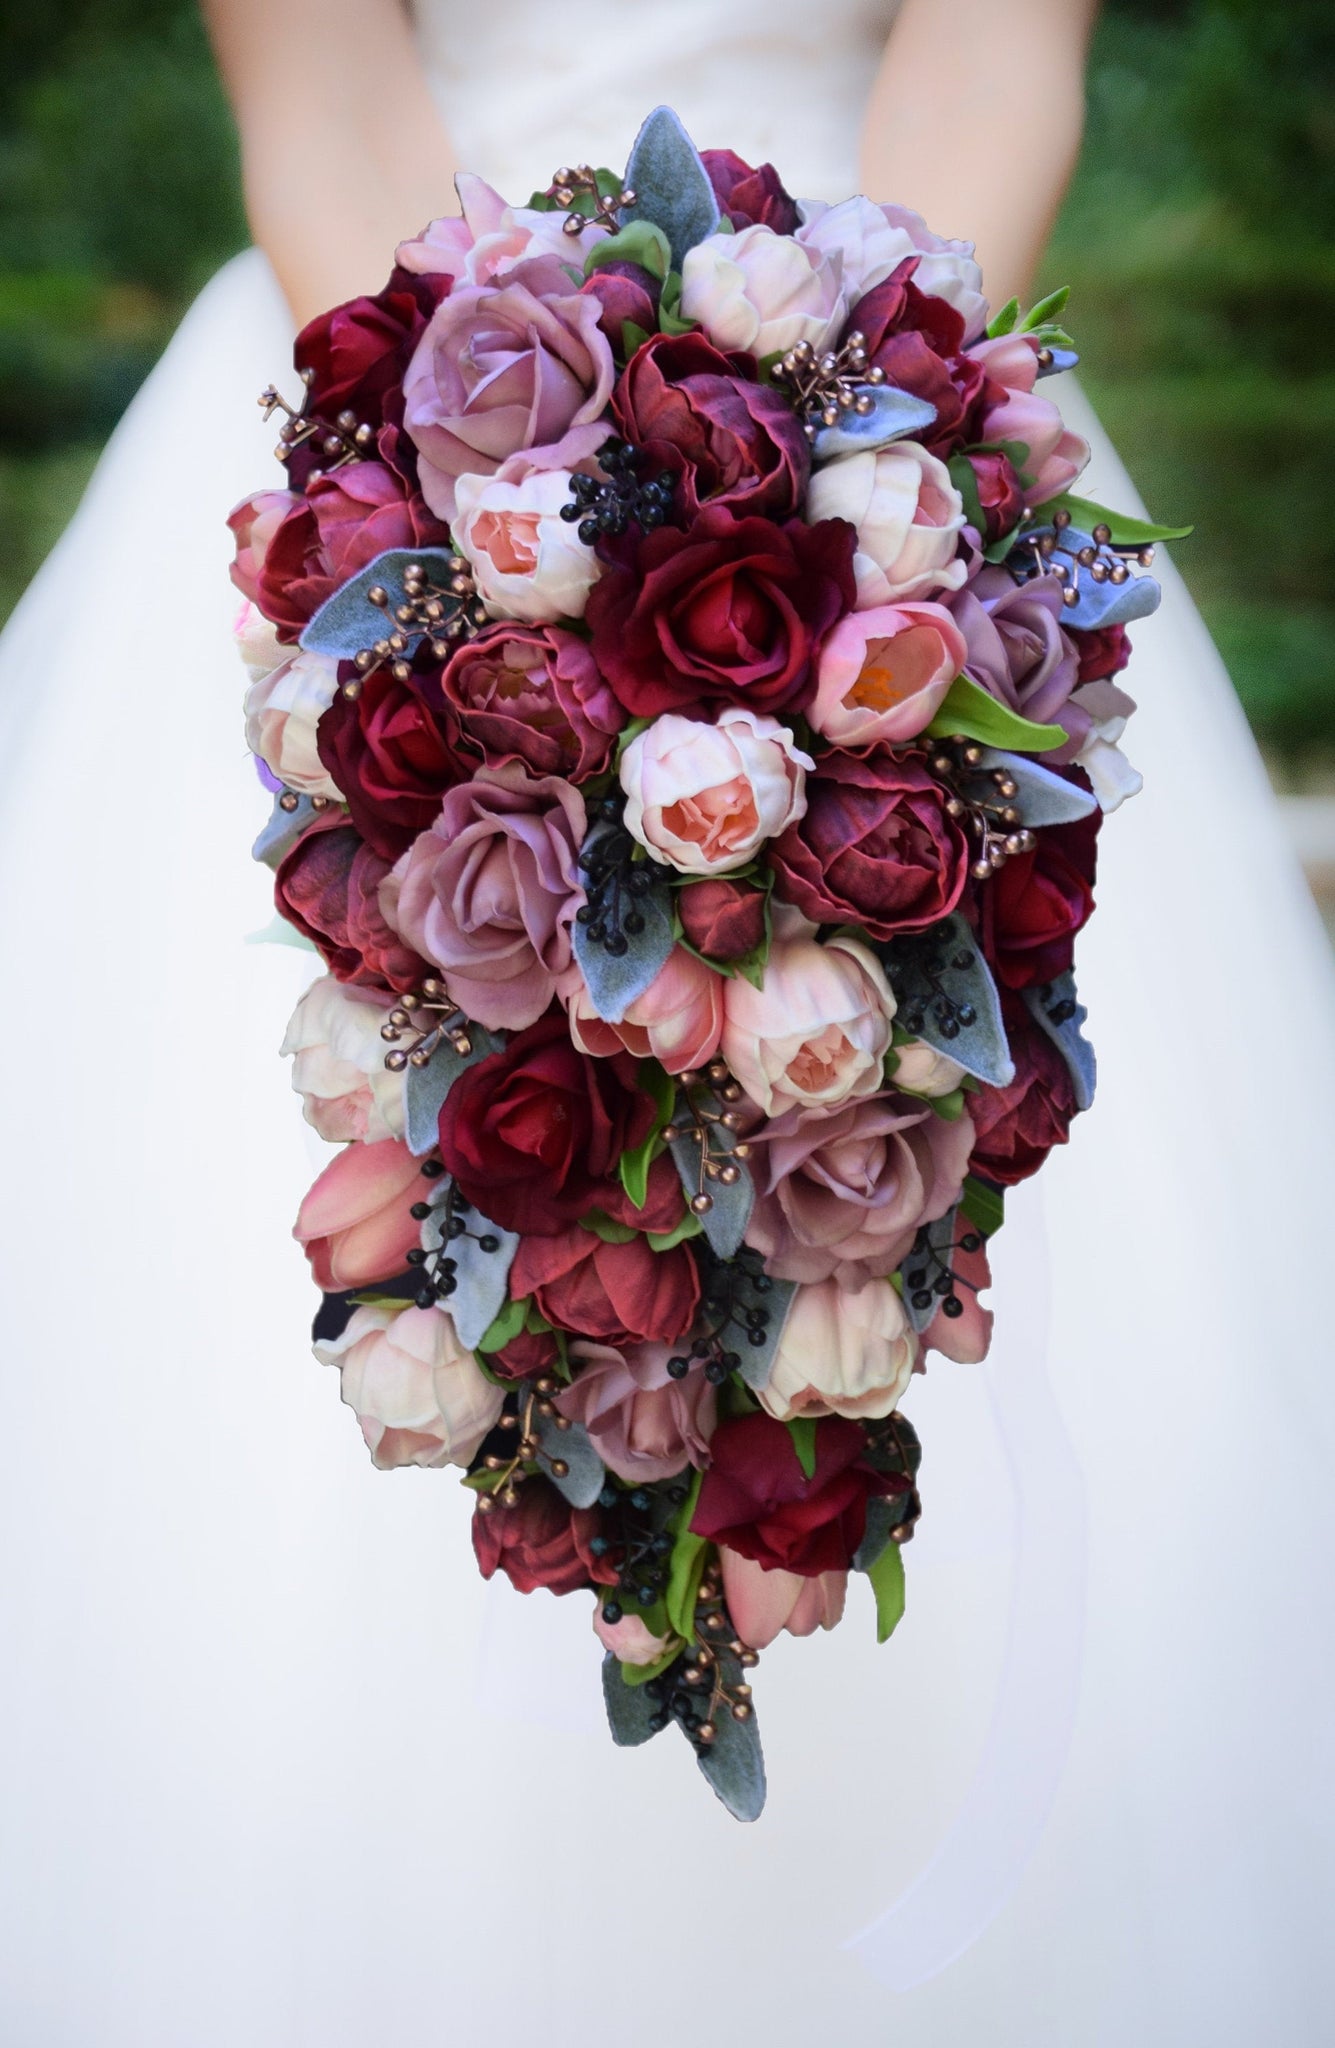 Cascade Bridal Bouquet Burgundy Blush Navy Dusty Rose Gold - Roses Peonies Tulips Berries - Add Groom Boutonniere Bridesmaid Bouquet & More!